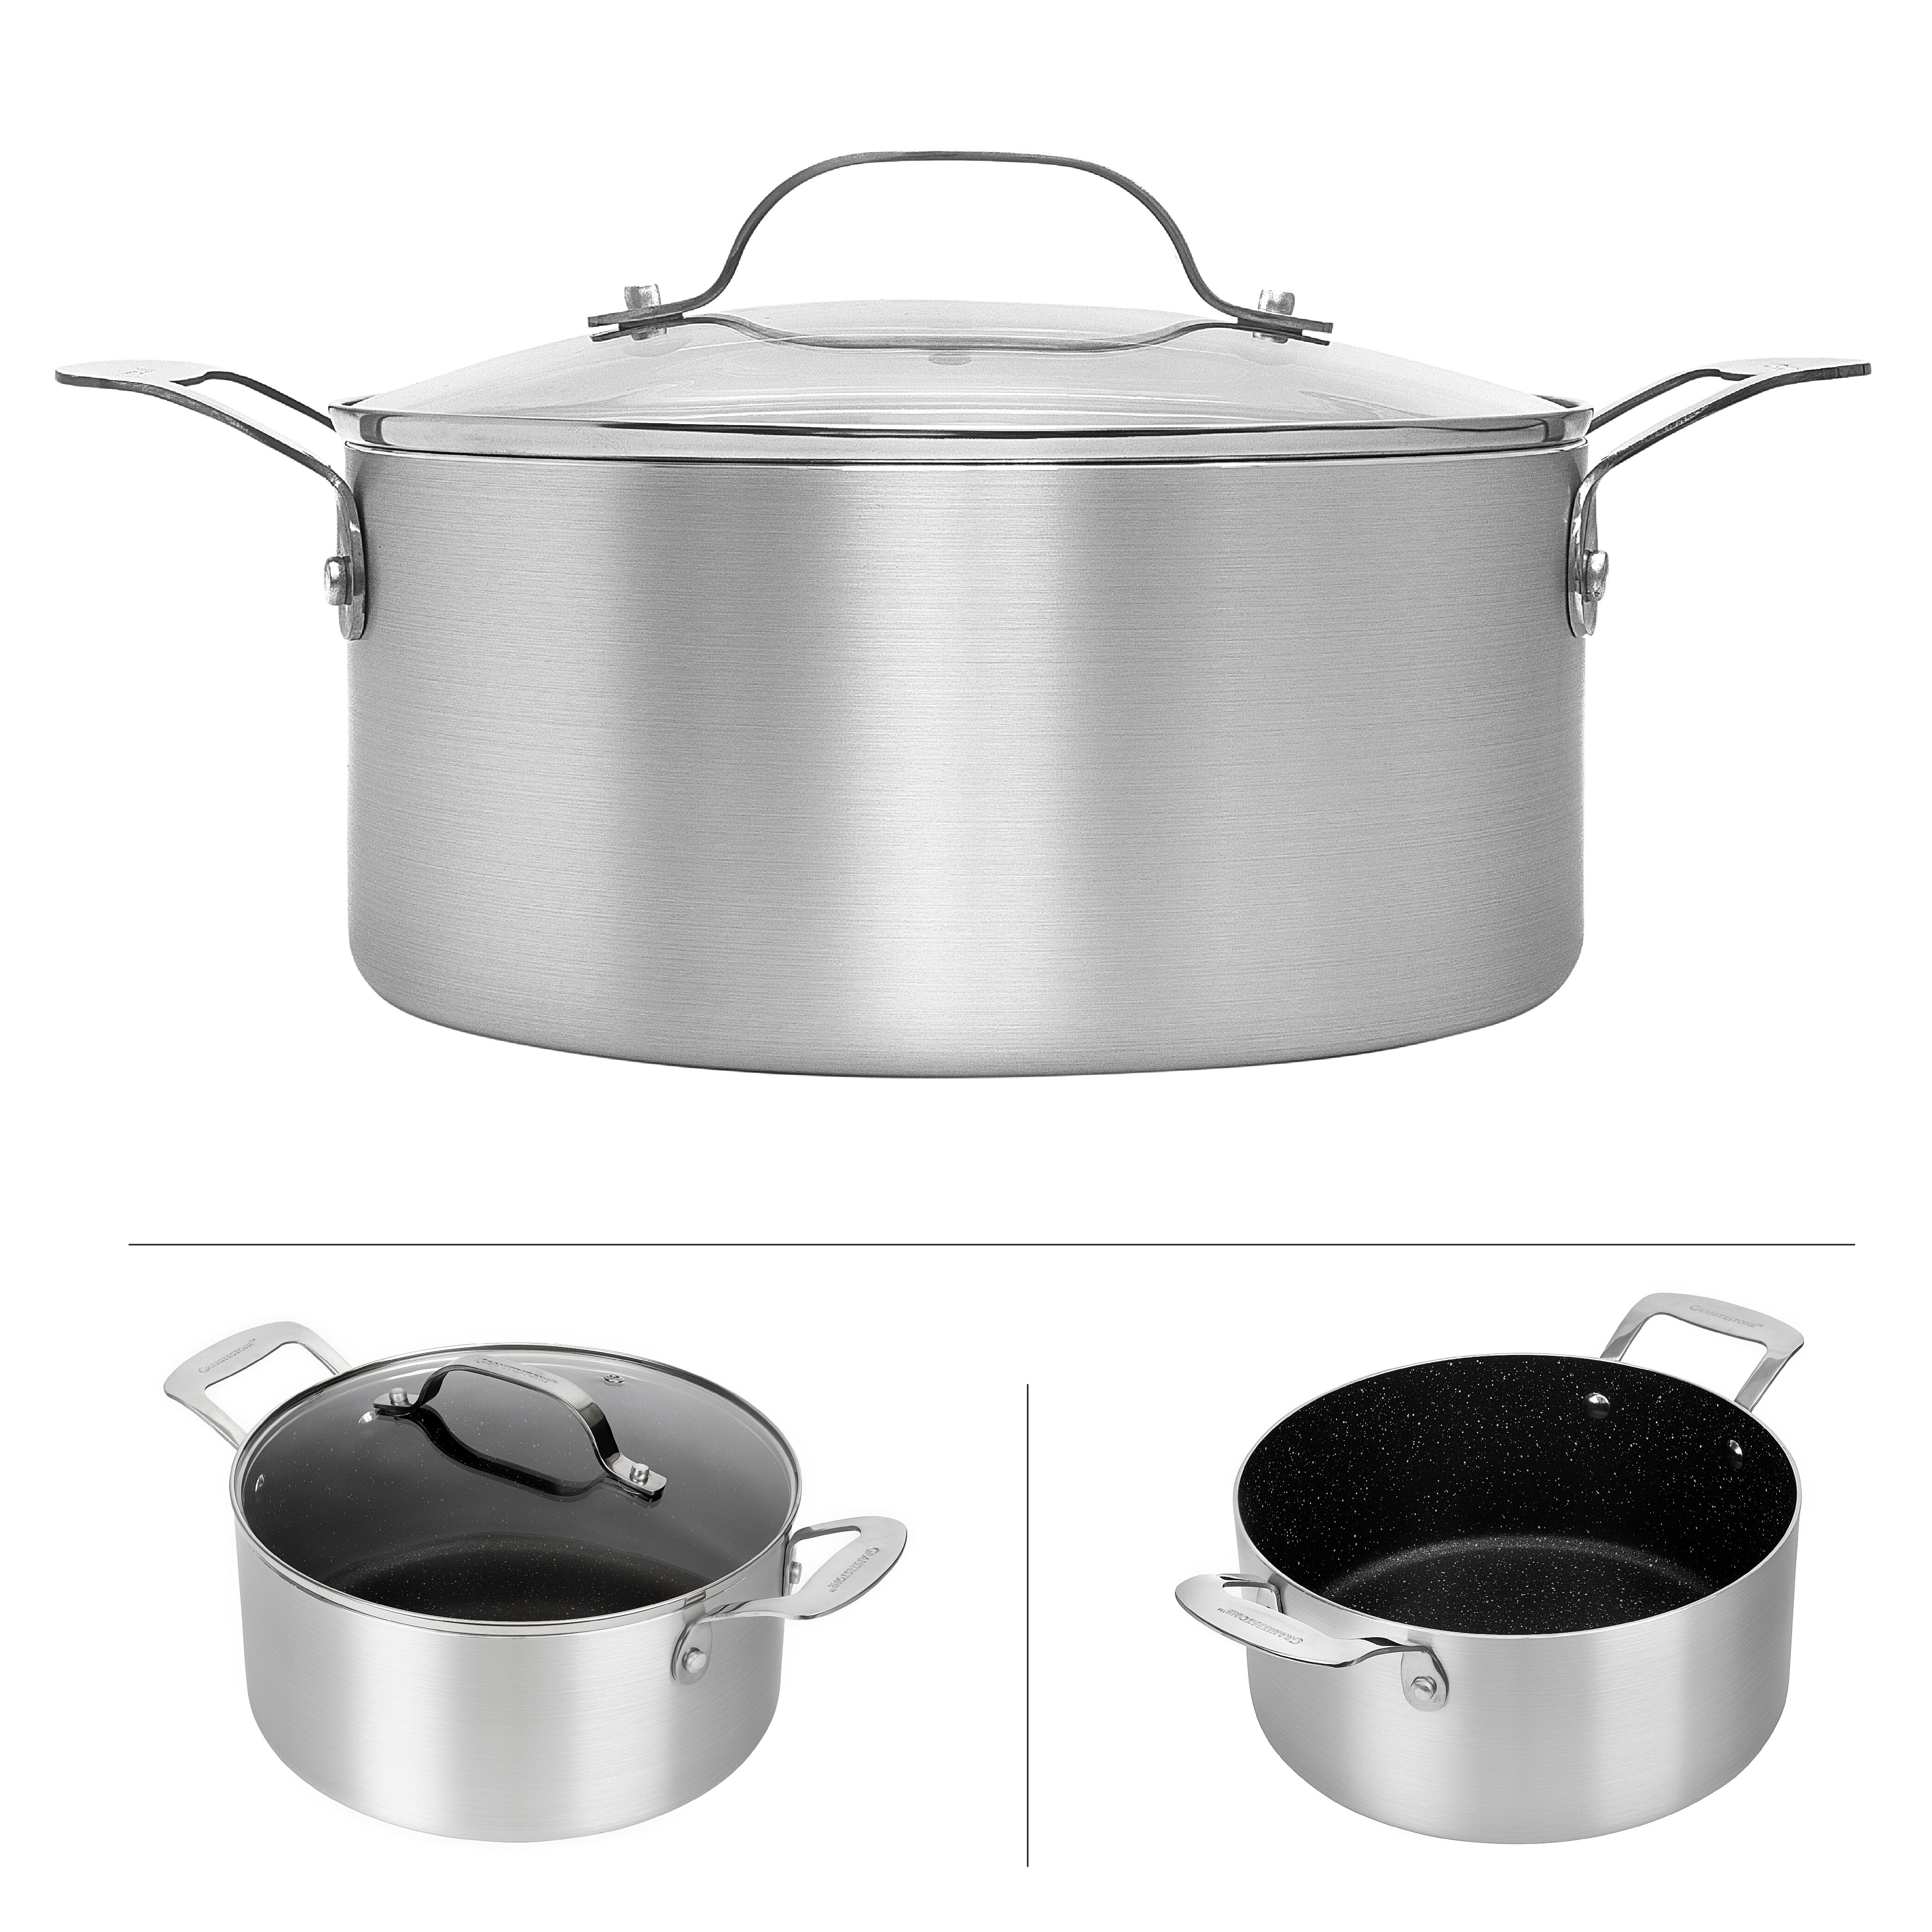 Granitestone Silver 5 QT Nonstick Stock Pot with Tempered Glass Lid, Oven &  Dishwasher Safe & Reviews